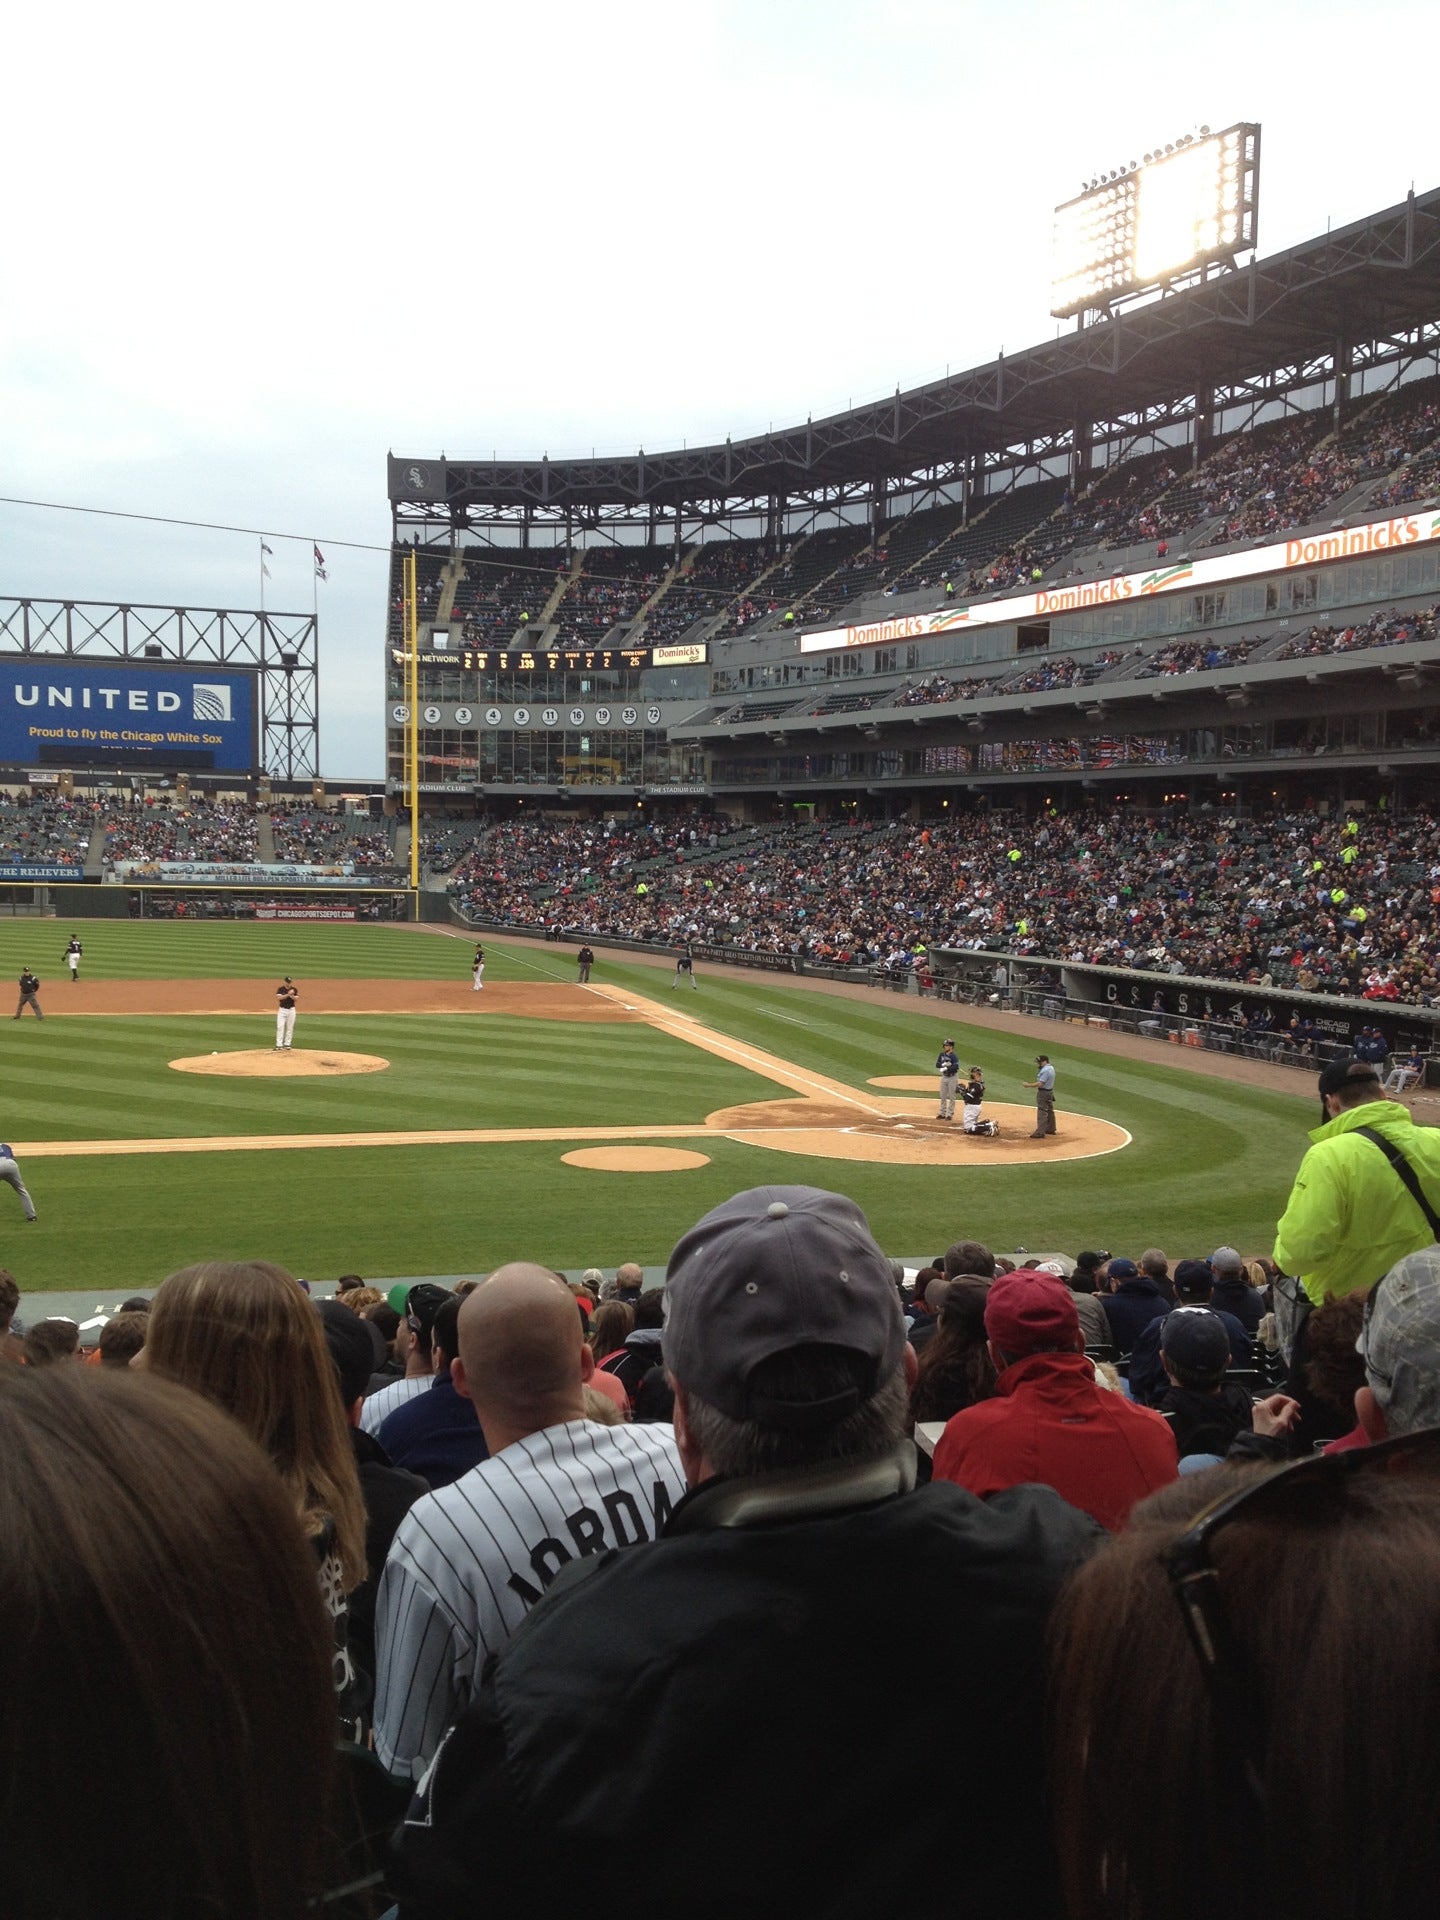 GUARANTEED RATE FIELD - 7862 Photos & 697 Reviews - 333 W 35th St, Chicago,  Illinois - Stadiums & Arenas - Phone Number - Yelp